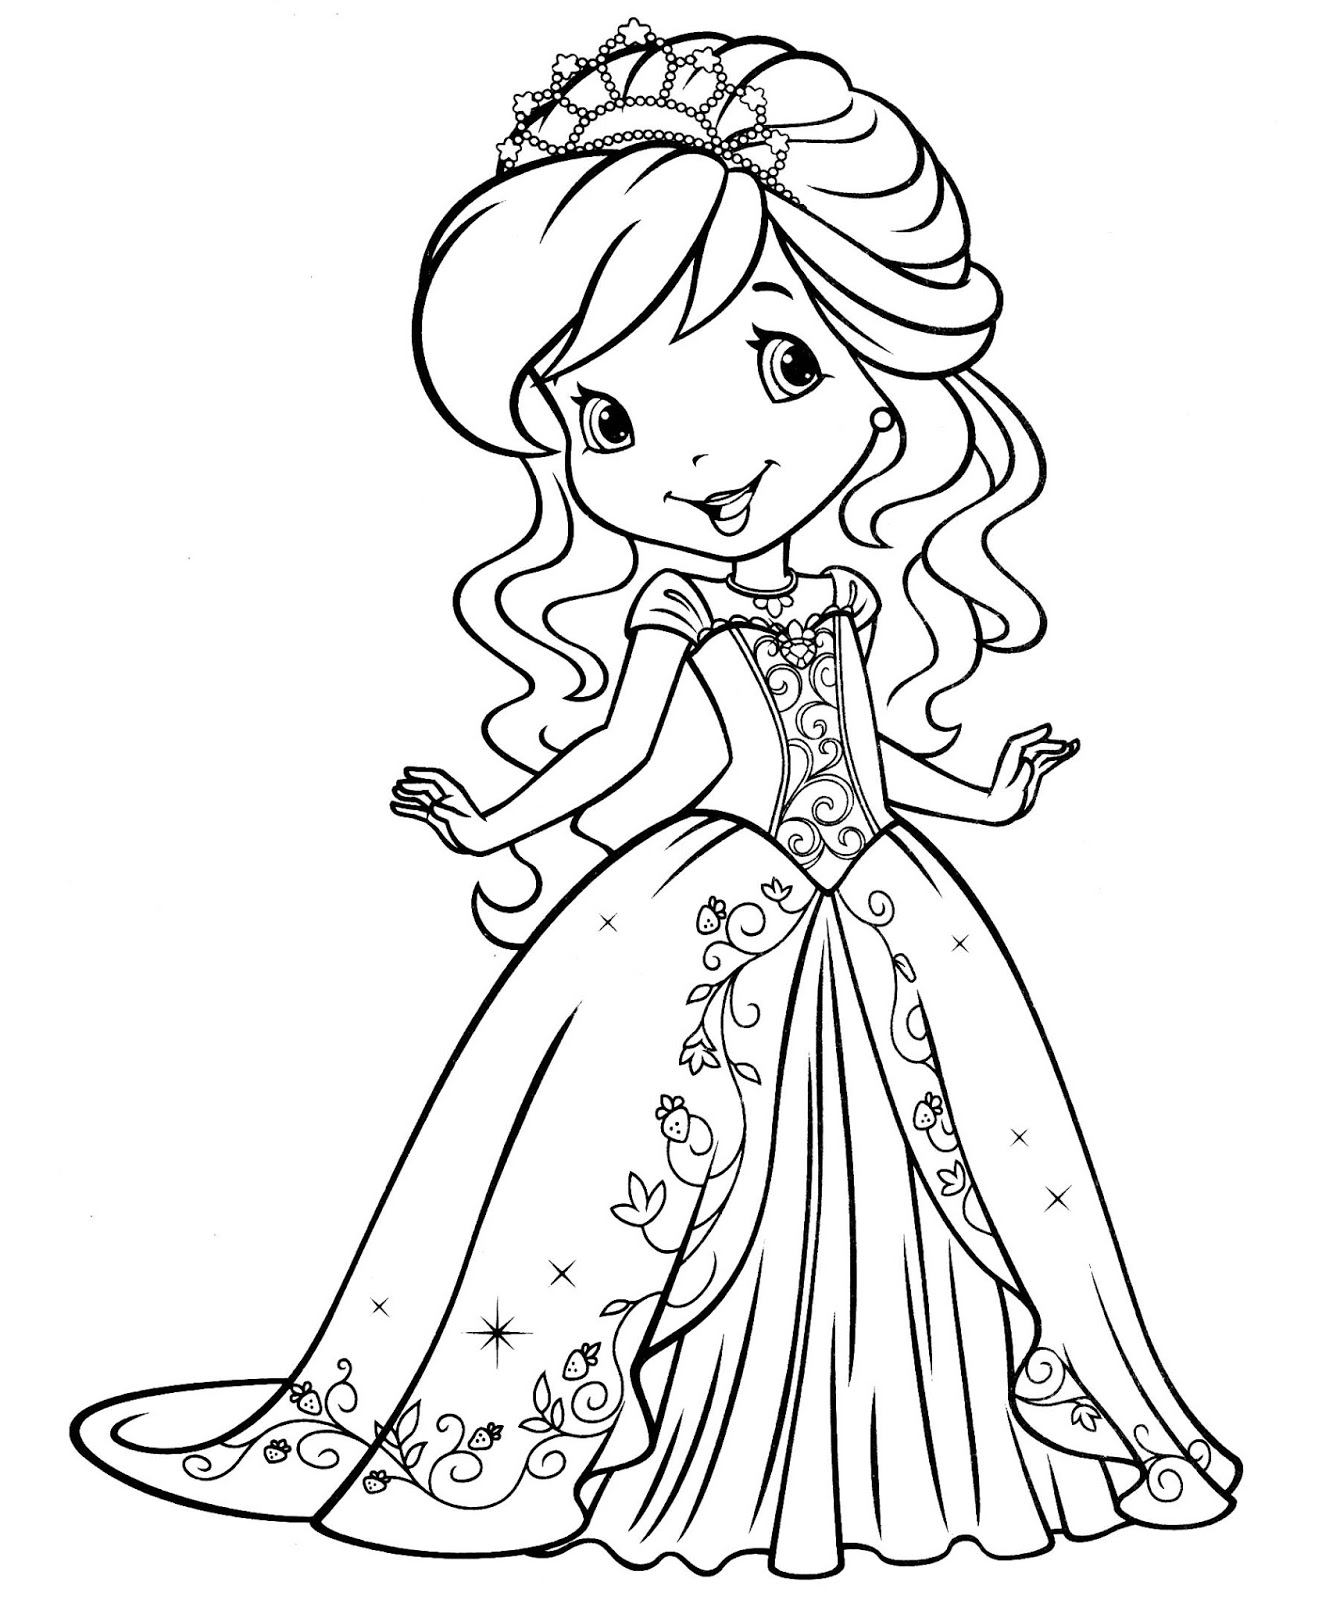 girl colouring pictures coloring pages for girls best coloring pages for kids girl pictures colouring 